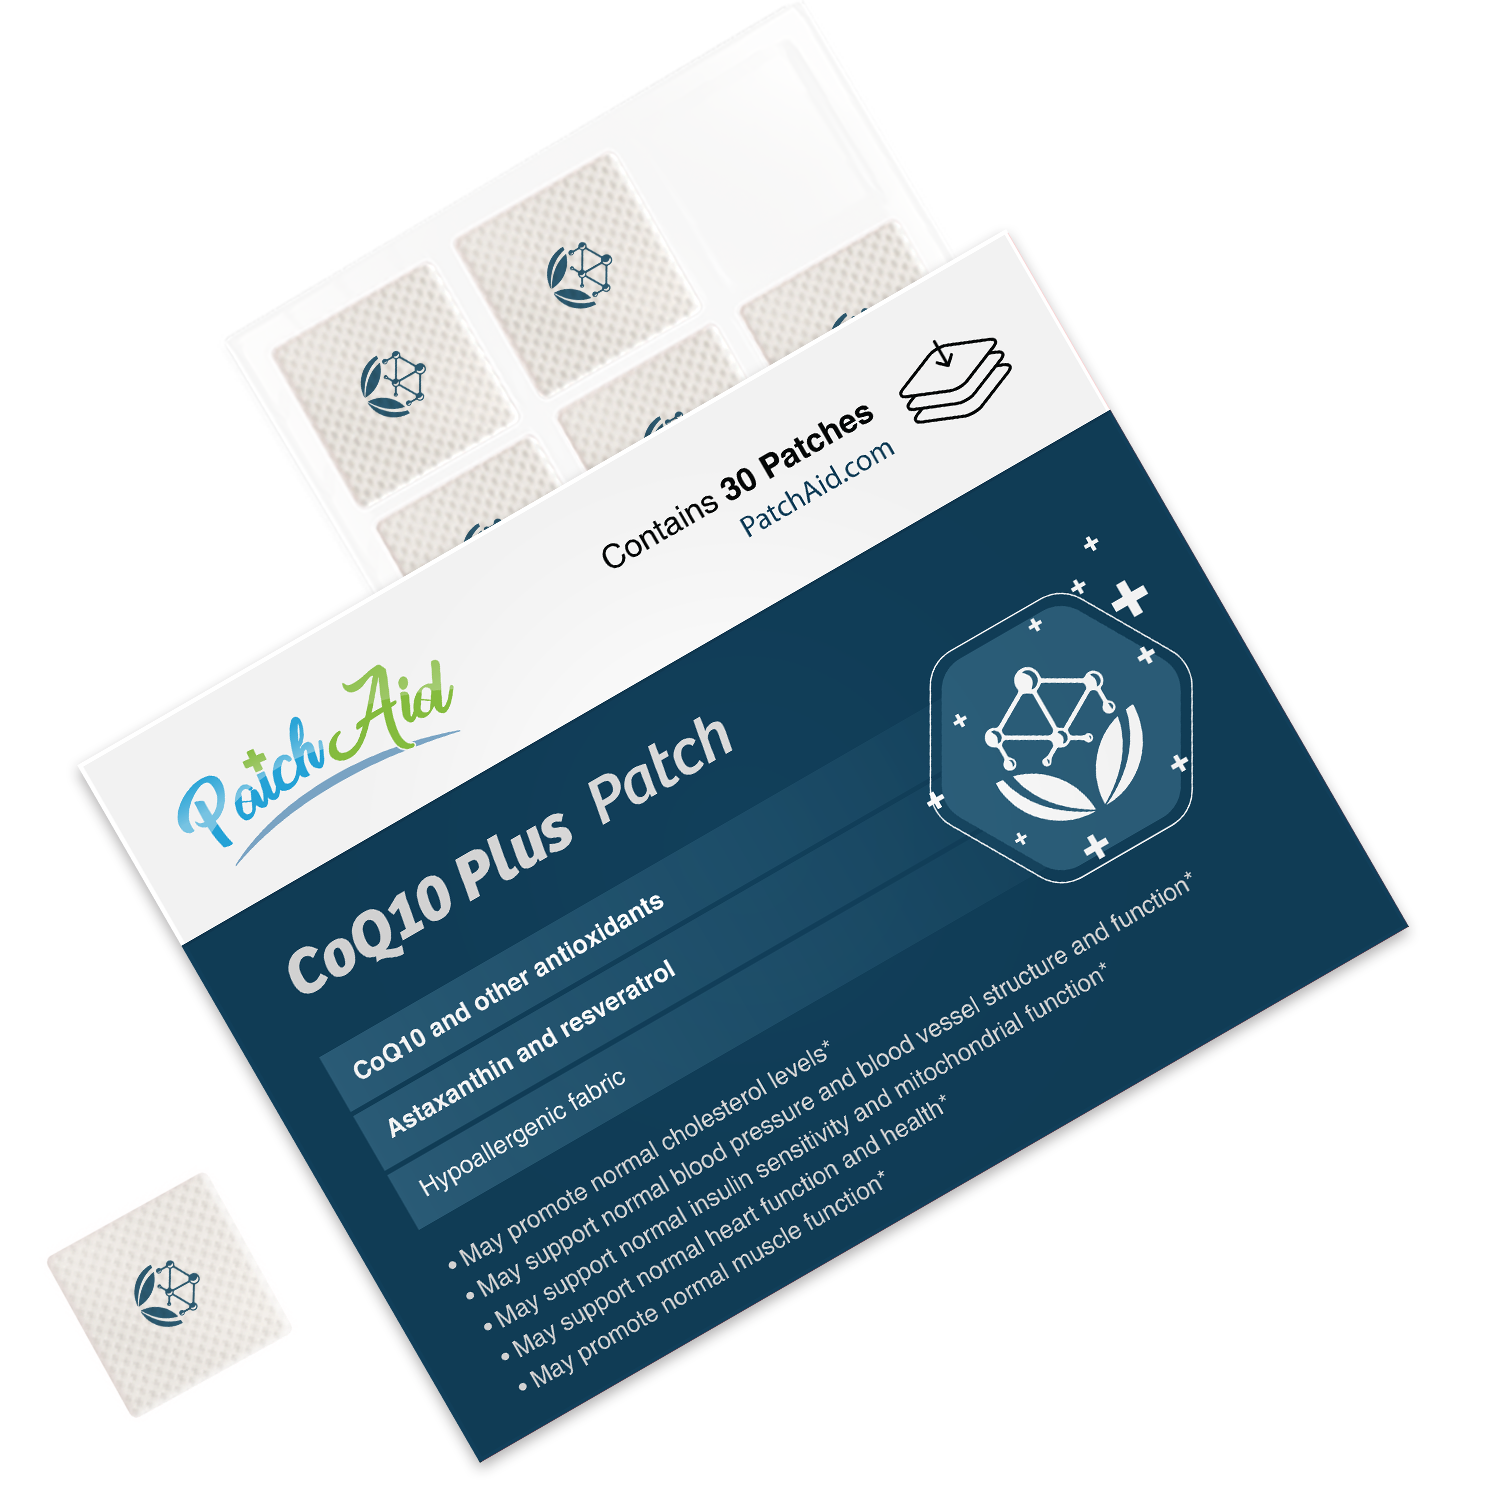 CoQ10 Plus Patch by PatchAid